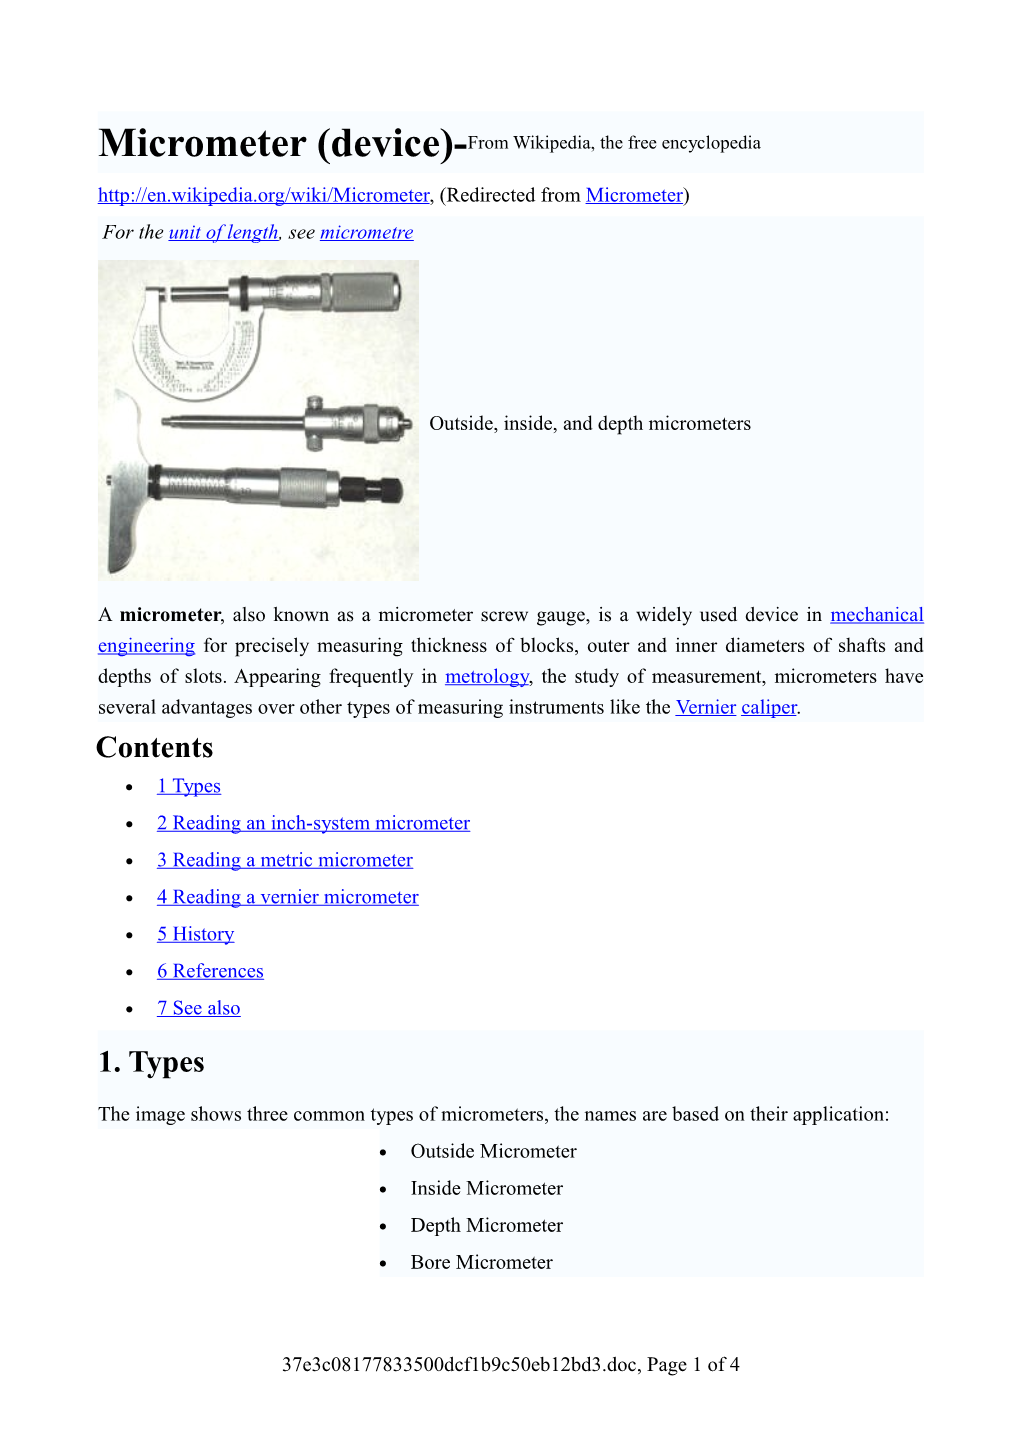 Micrometer (Device)-From Wikipedia, the Free Encyclopedia